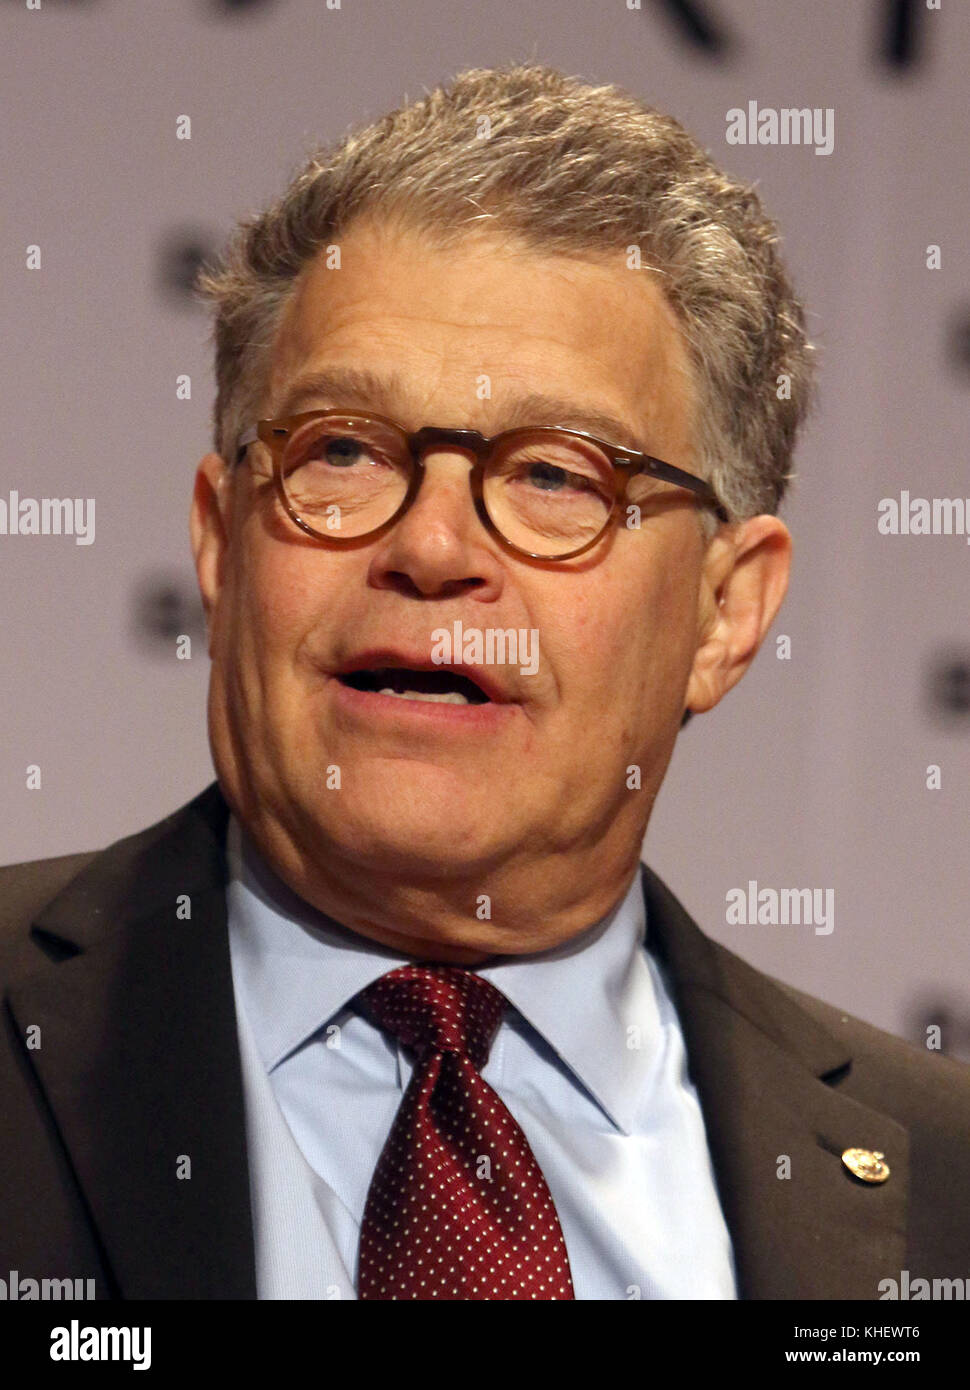 November 16, 2017 - FILE - Anchorwoman and sportscaster Leeann Tweeden said Thursday that comedian AL FRANKEN kissed and groped her without her consent during a USO tour in December 2006. 'He came at me, put his hand on the back of my head, mashed his lips against mine and aggressively stuck his tongue in my mouth.' Pictured: June 2, 2017 - New York, New York, U.S. - US Senator Al Franken attends the Book Expo 2017 Day 2 event held at the Jacob Javits Center. (Credit Image: © Nancy Kaszerman via ZUMA Wire) Stock Photo